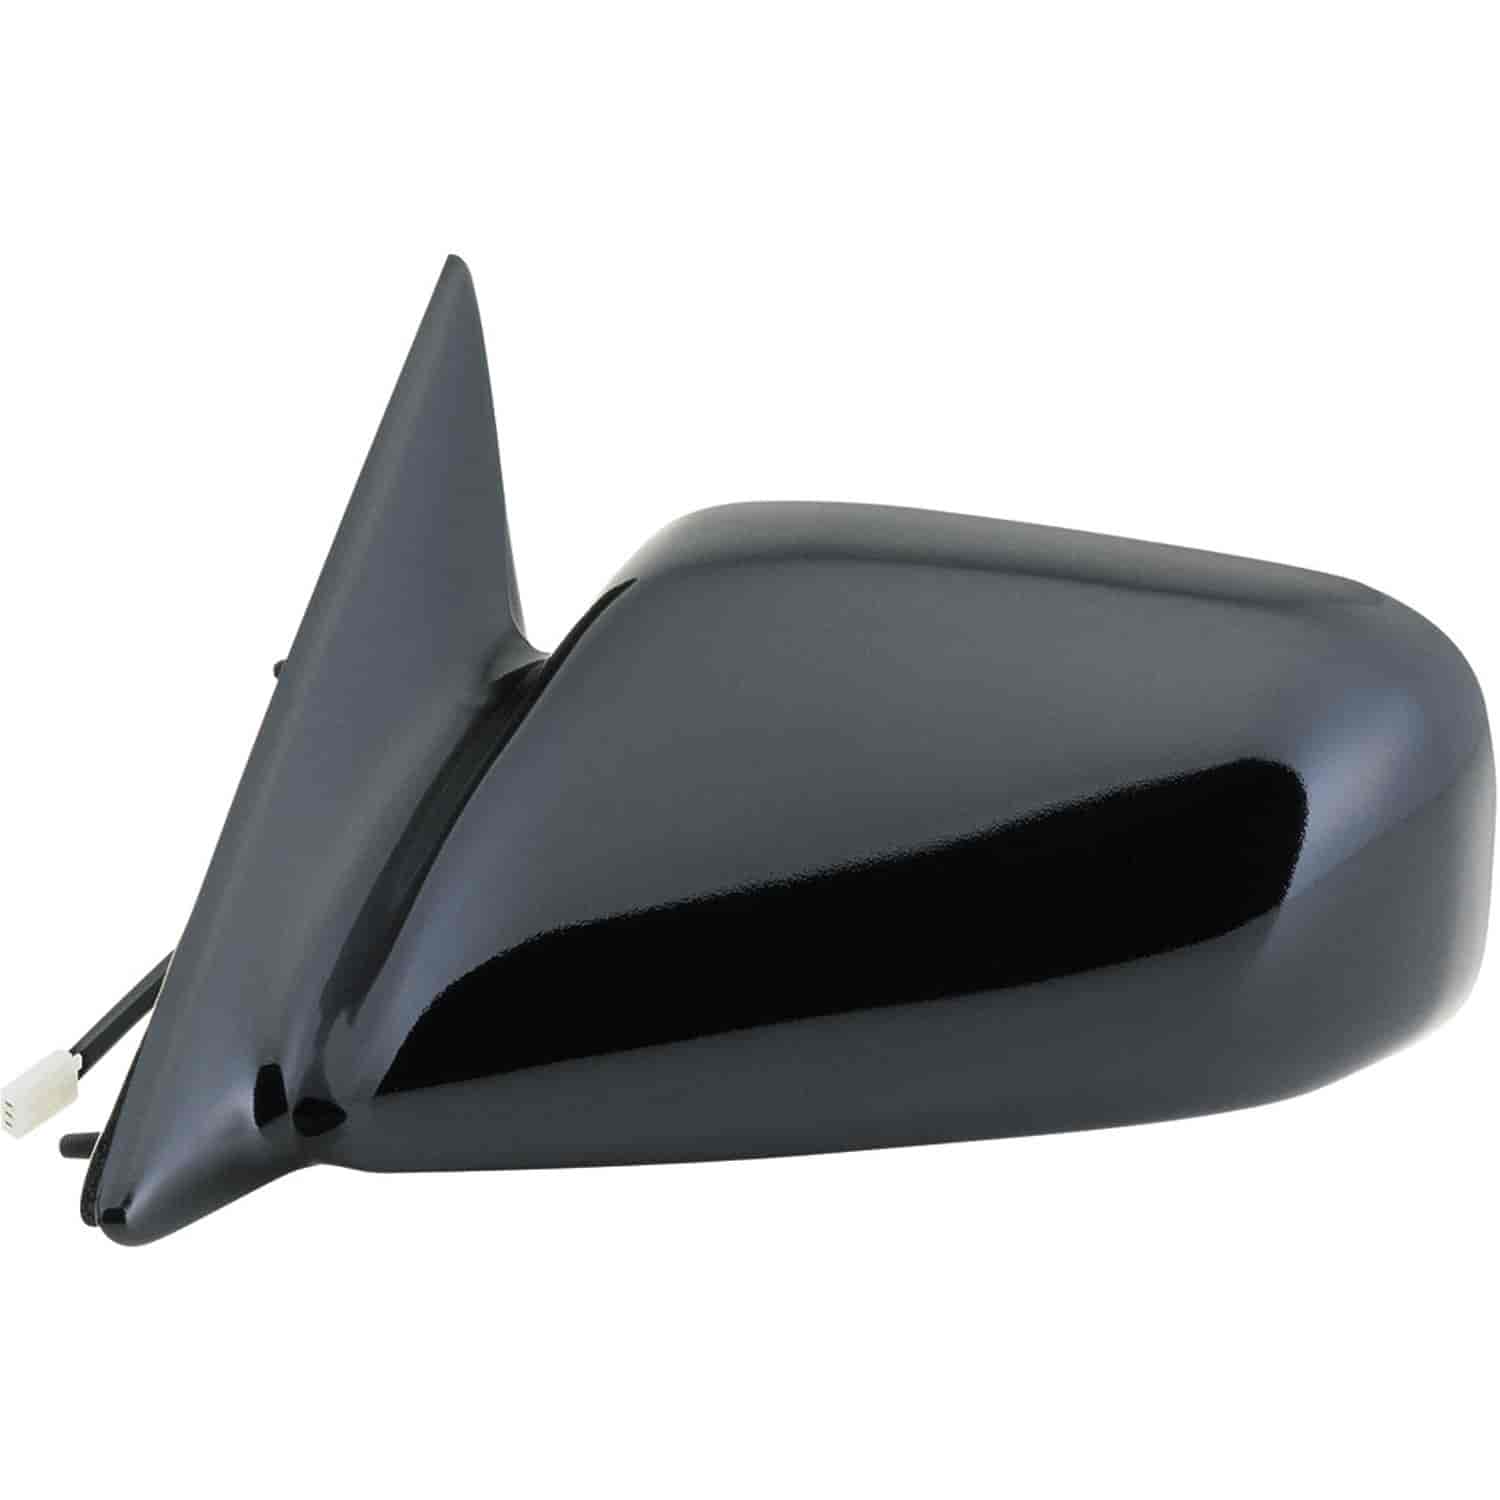 OEM Style Replacement mirror for 97-01 Toyota Camry US built driver side mirror tested to fit and fu